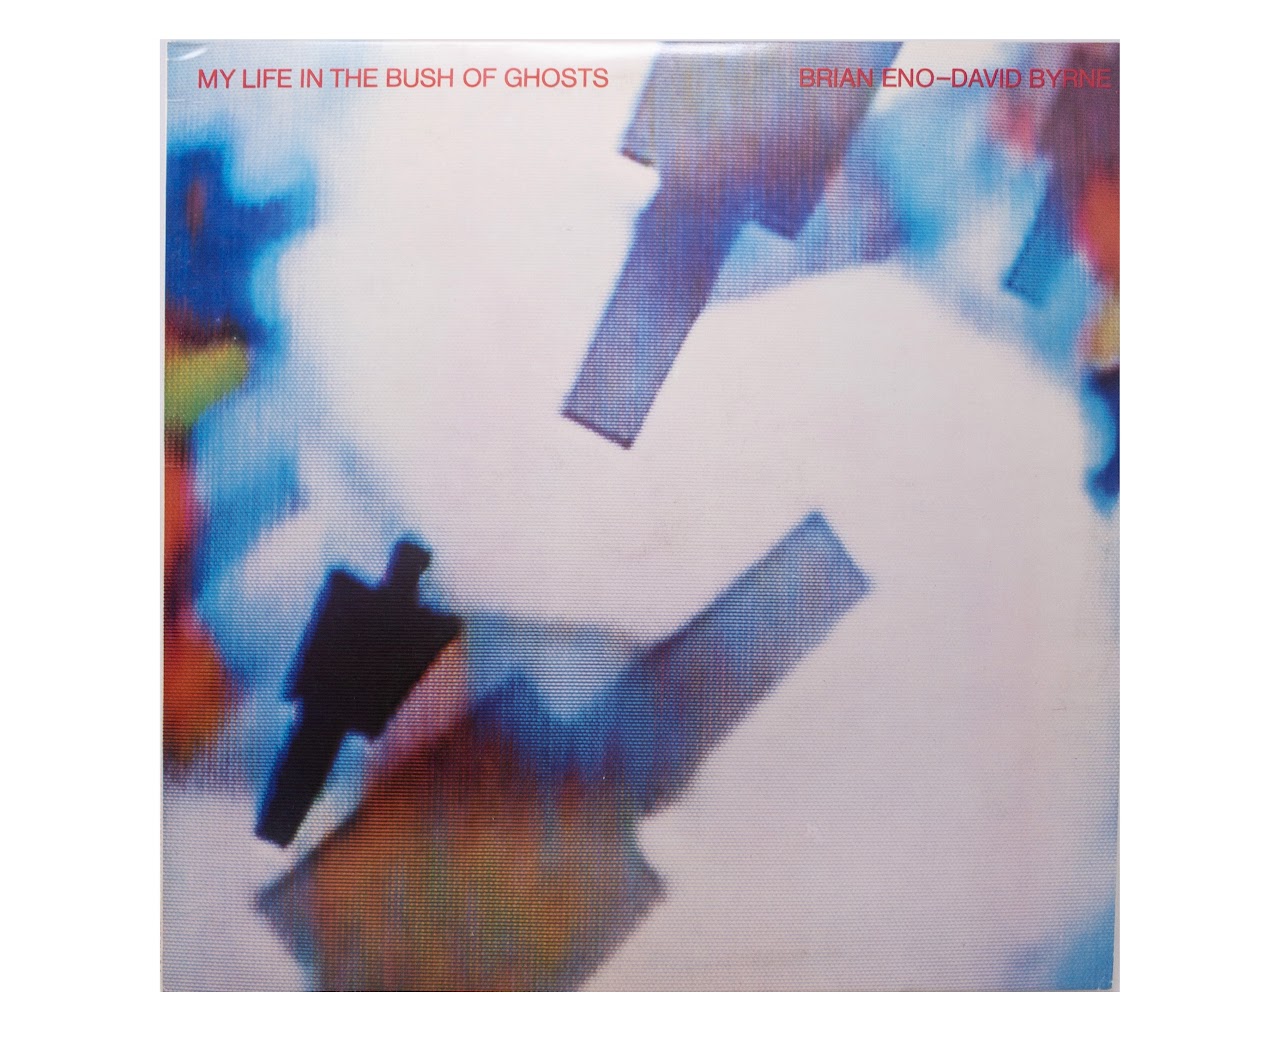 Brian Eno + David Byrne: 'My Life in the Bush of Ghosts' 1981 LP